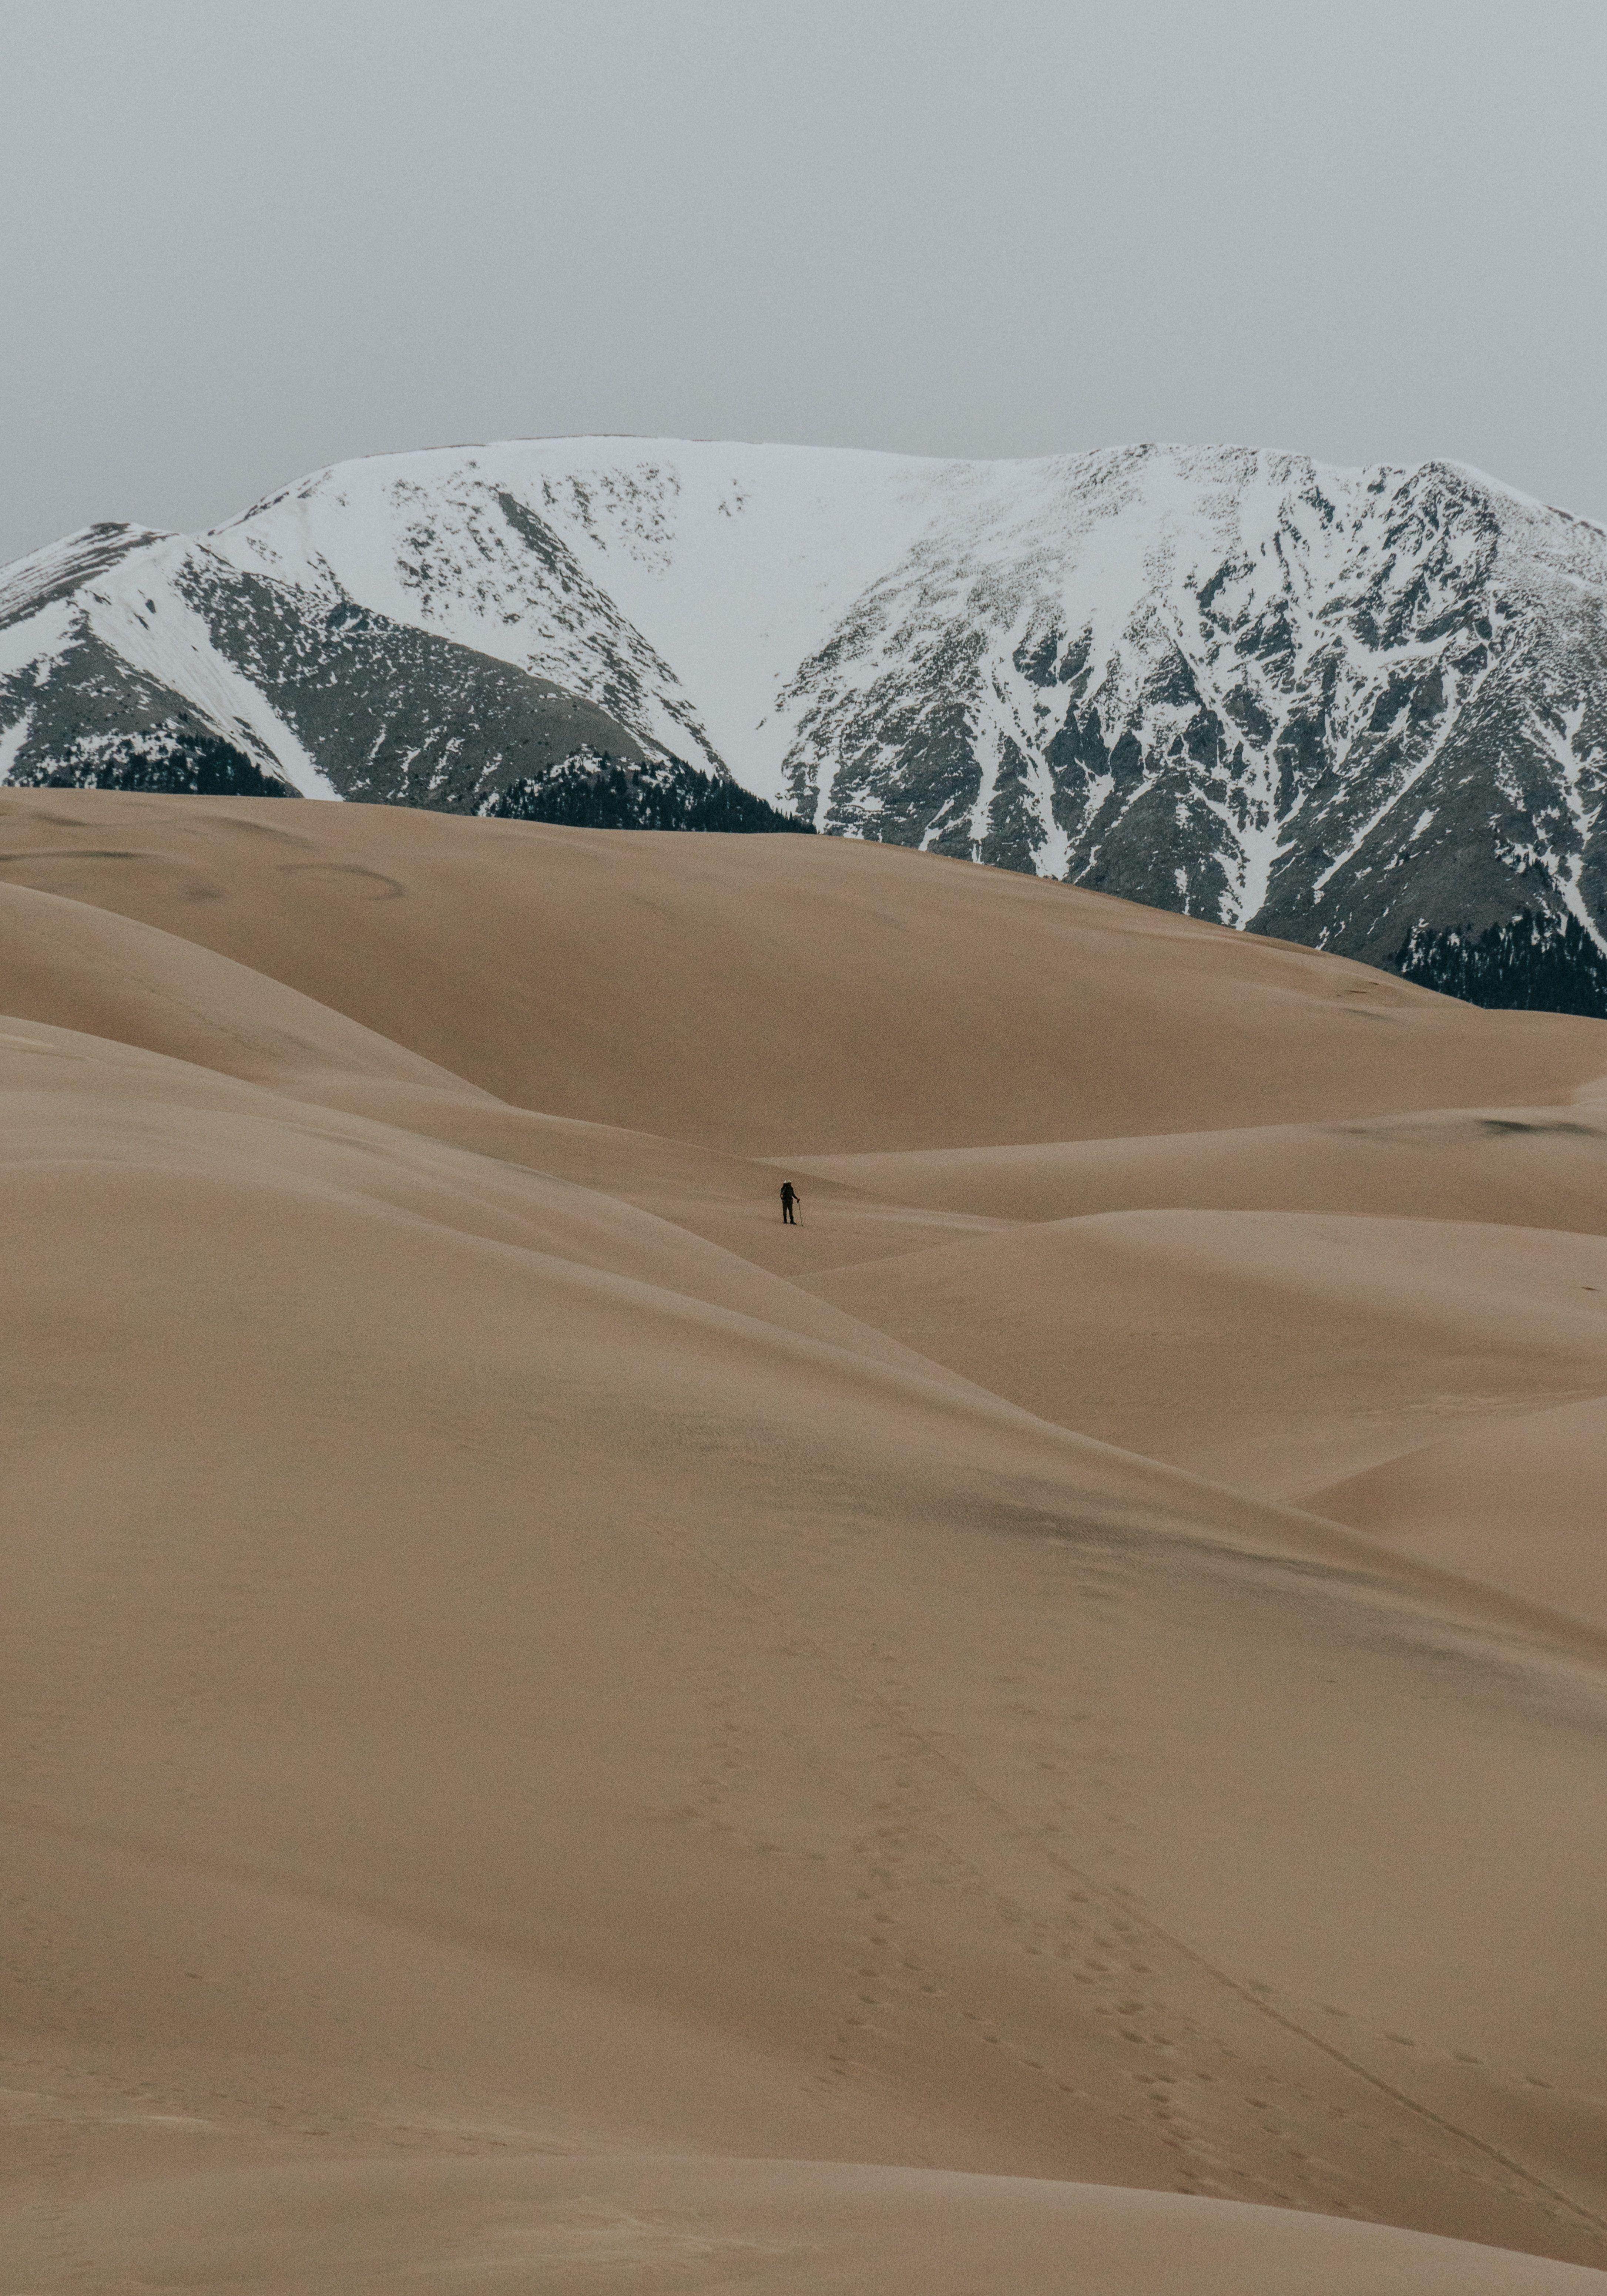 HD Wallpaper The silhouette of a lone hiker among sand dunes